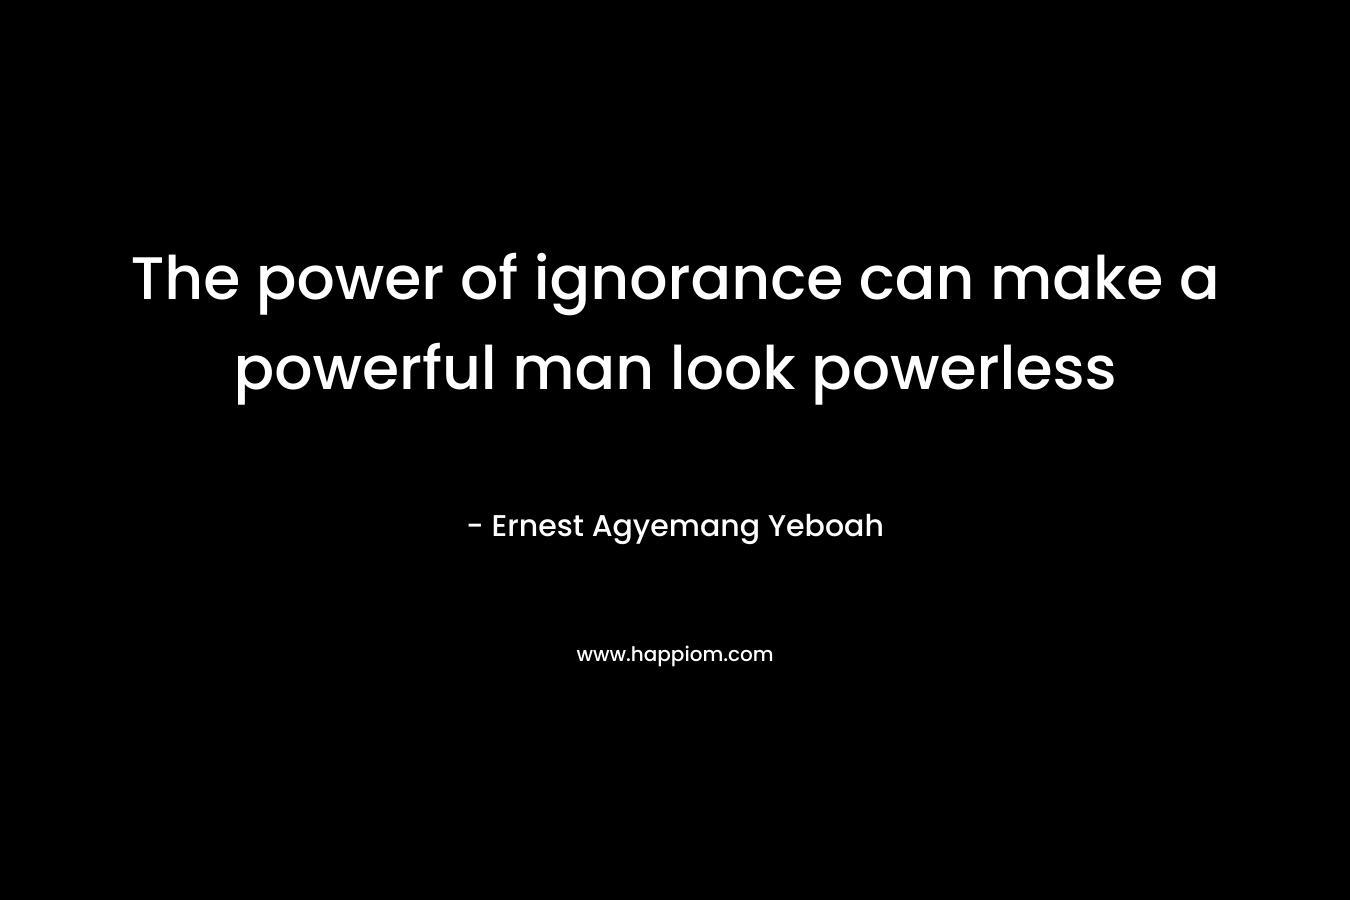 The power of ignorance can make a powerful man look powerless